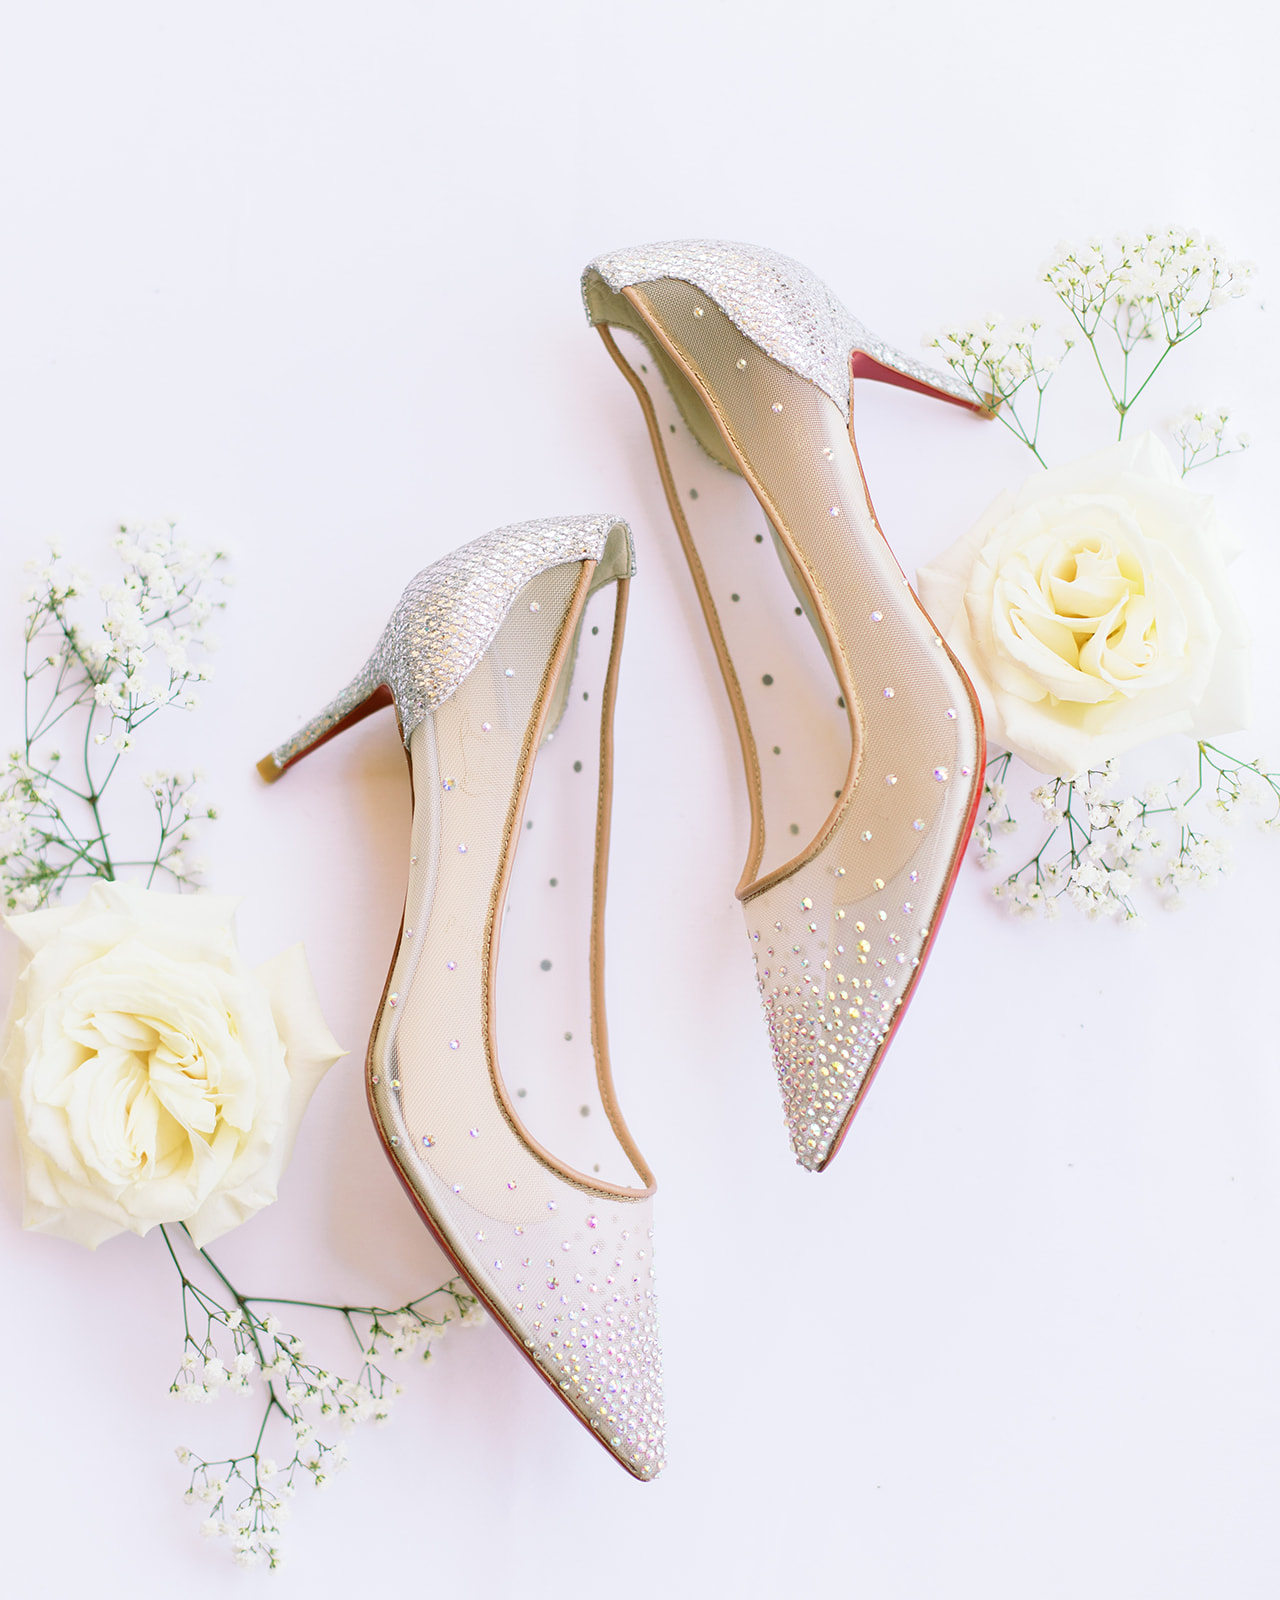 Bride's sheer shoes with sequins photographed with baby's breath and white roses.